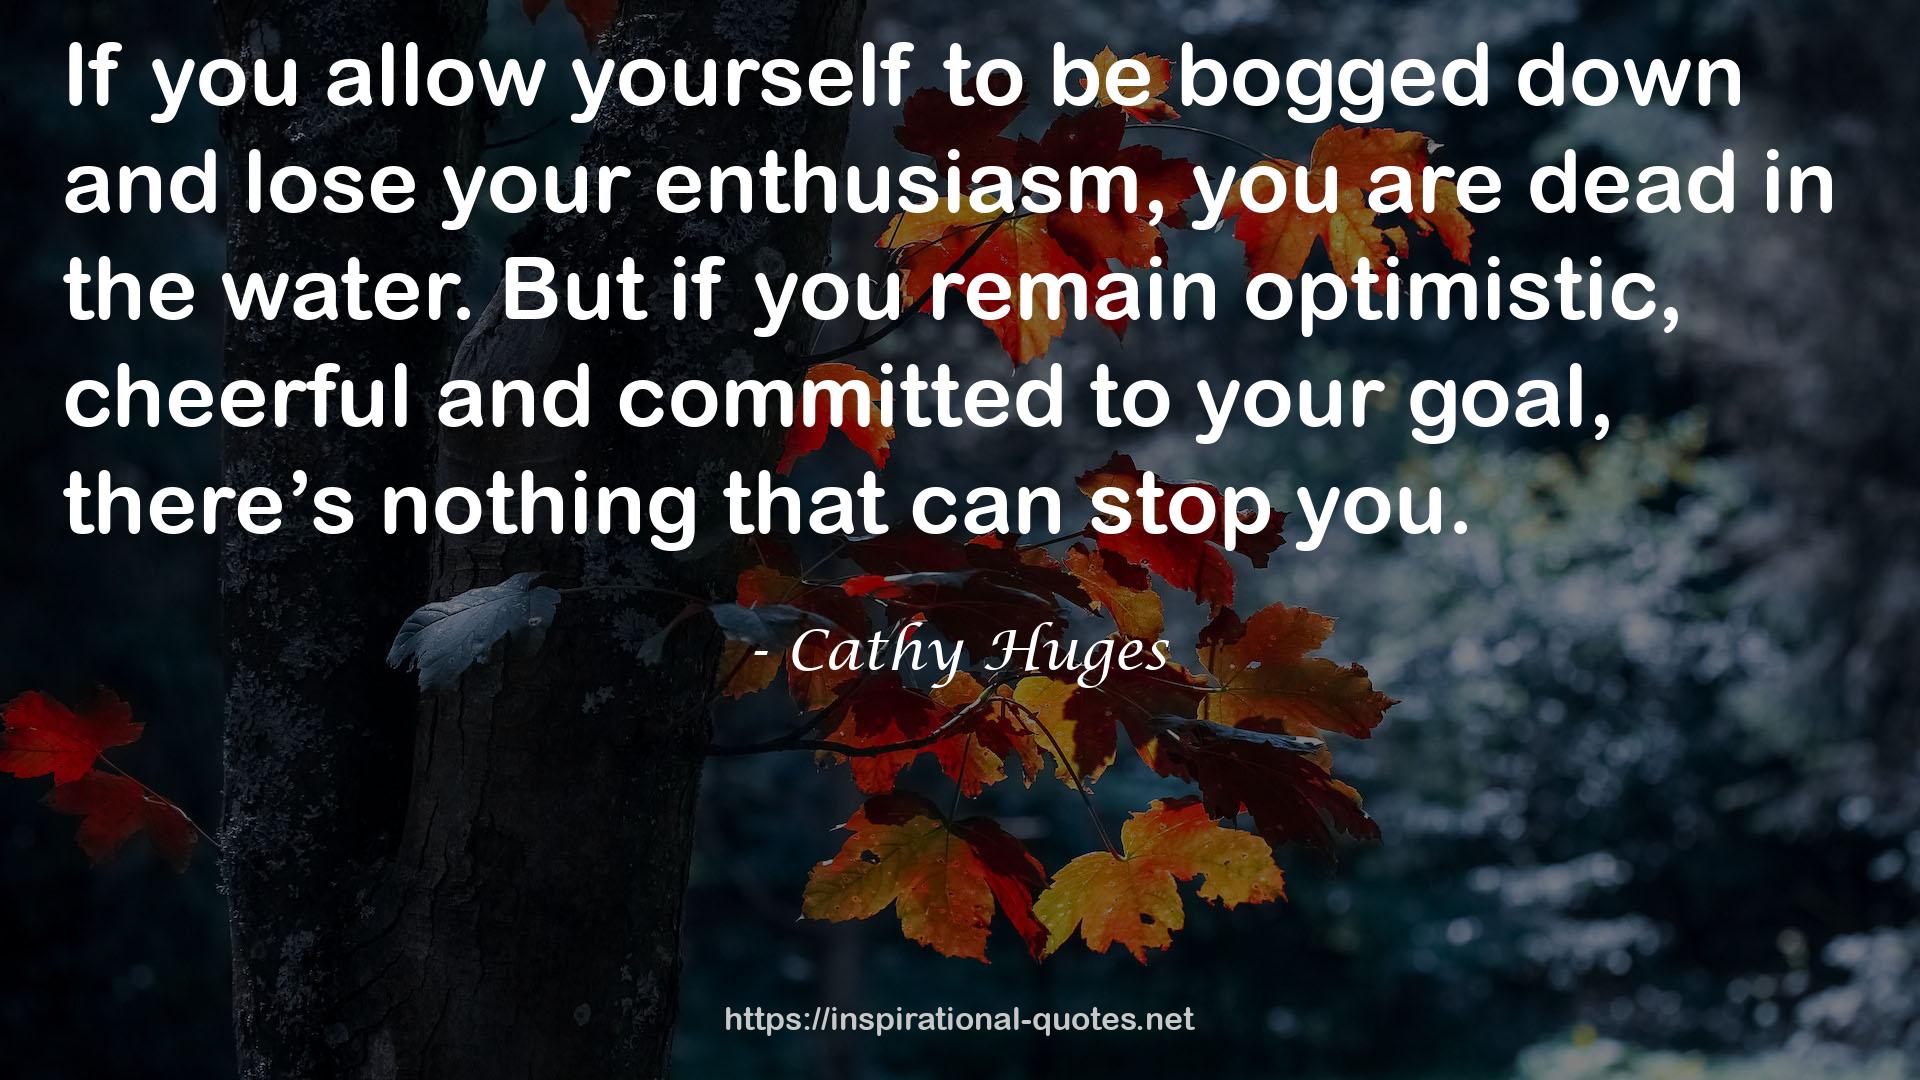 Cathy Huges QUOTES